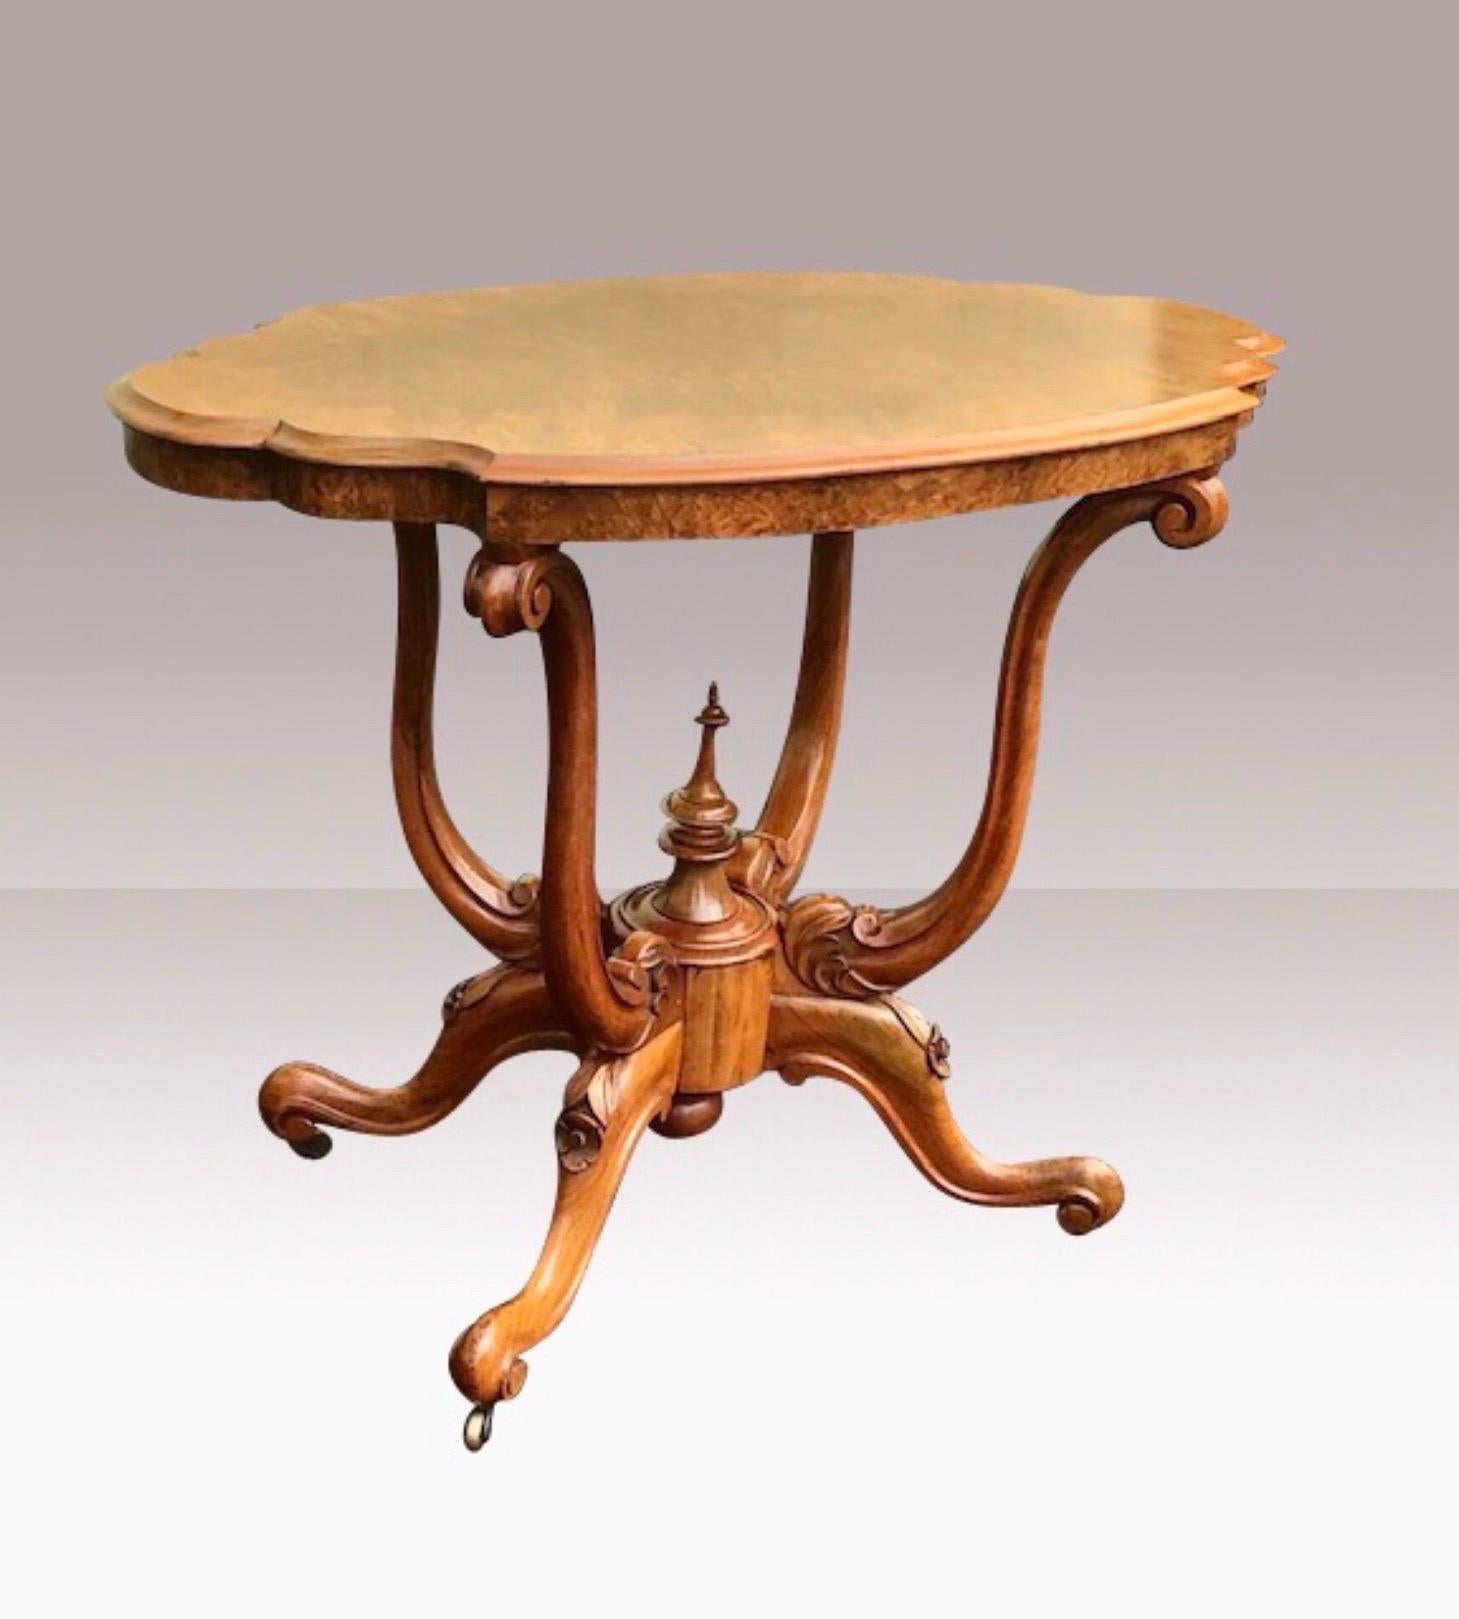 Antique Burr Walnut Window Table, Occasional Table In Good Condition For Sale In Antrim, GB